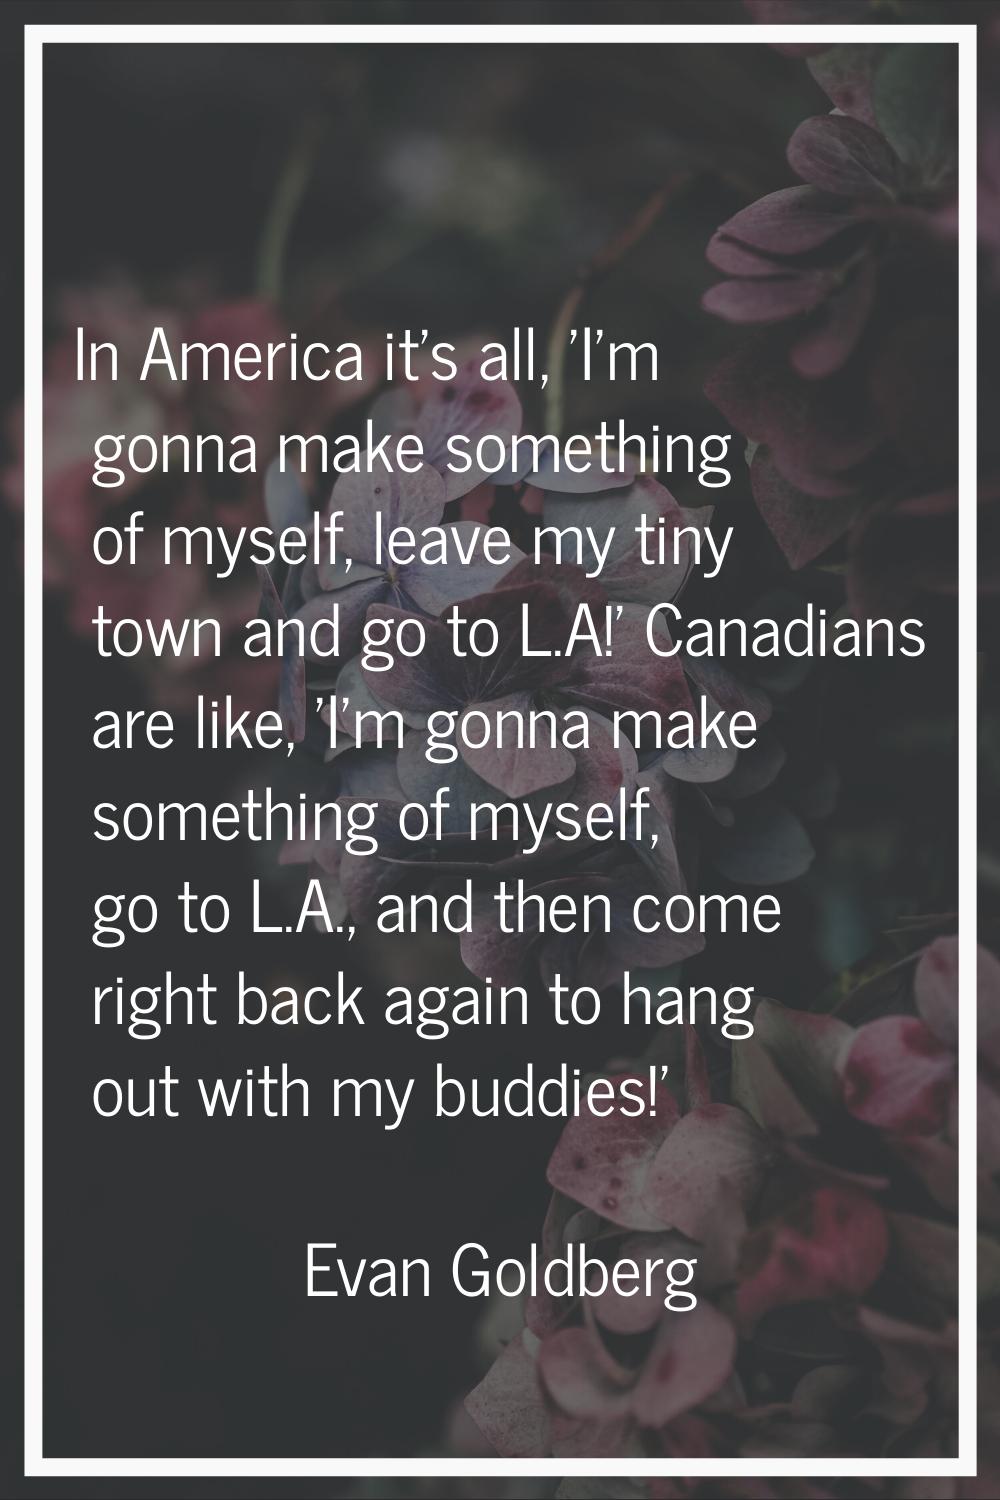 In America it's all, 'I'm gonna make something of myself, leave my tiny town and go to L.A!' Canadi